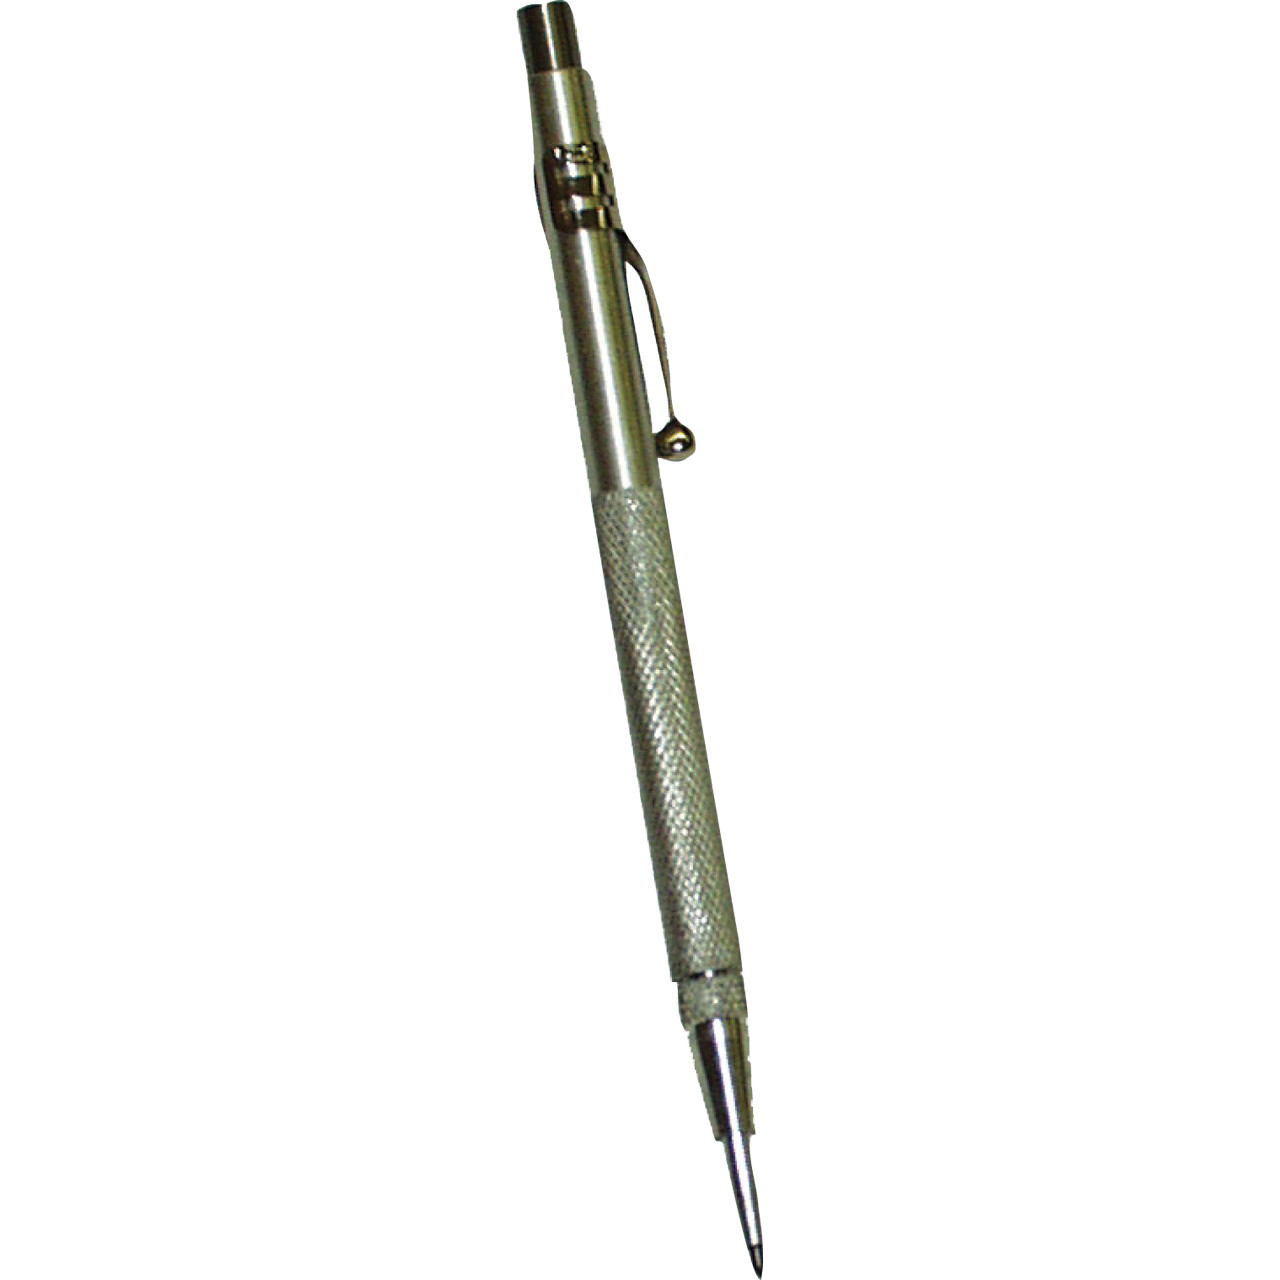 Engineer’s Scriber with Metal Body and Hard-Metal Point 153mm